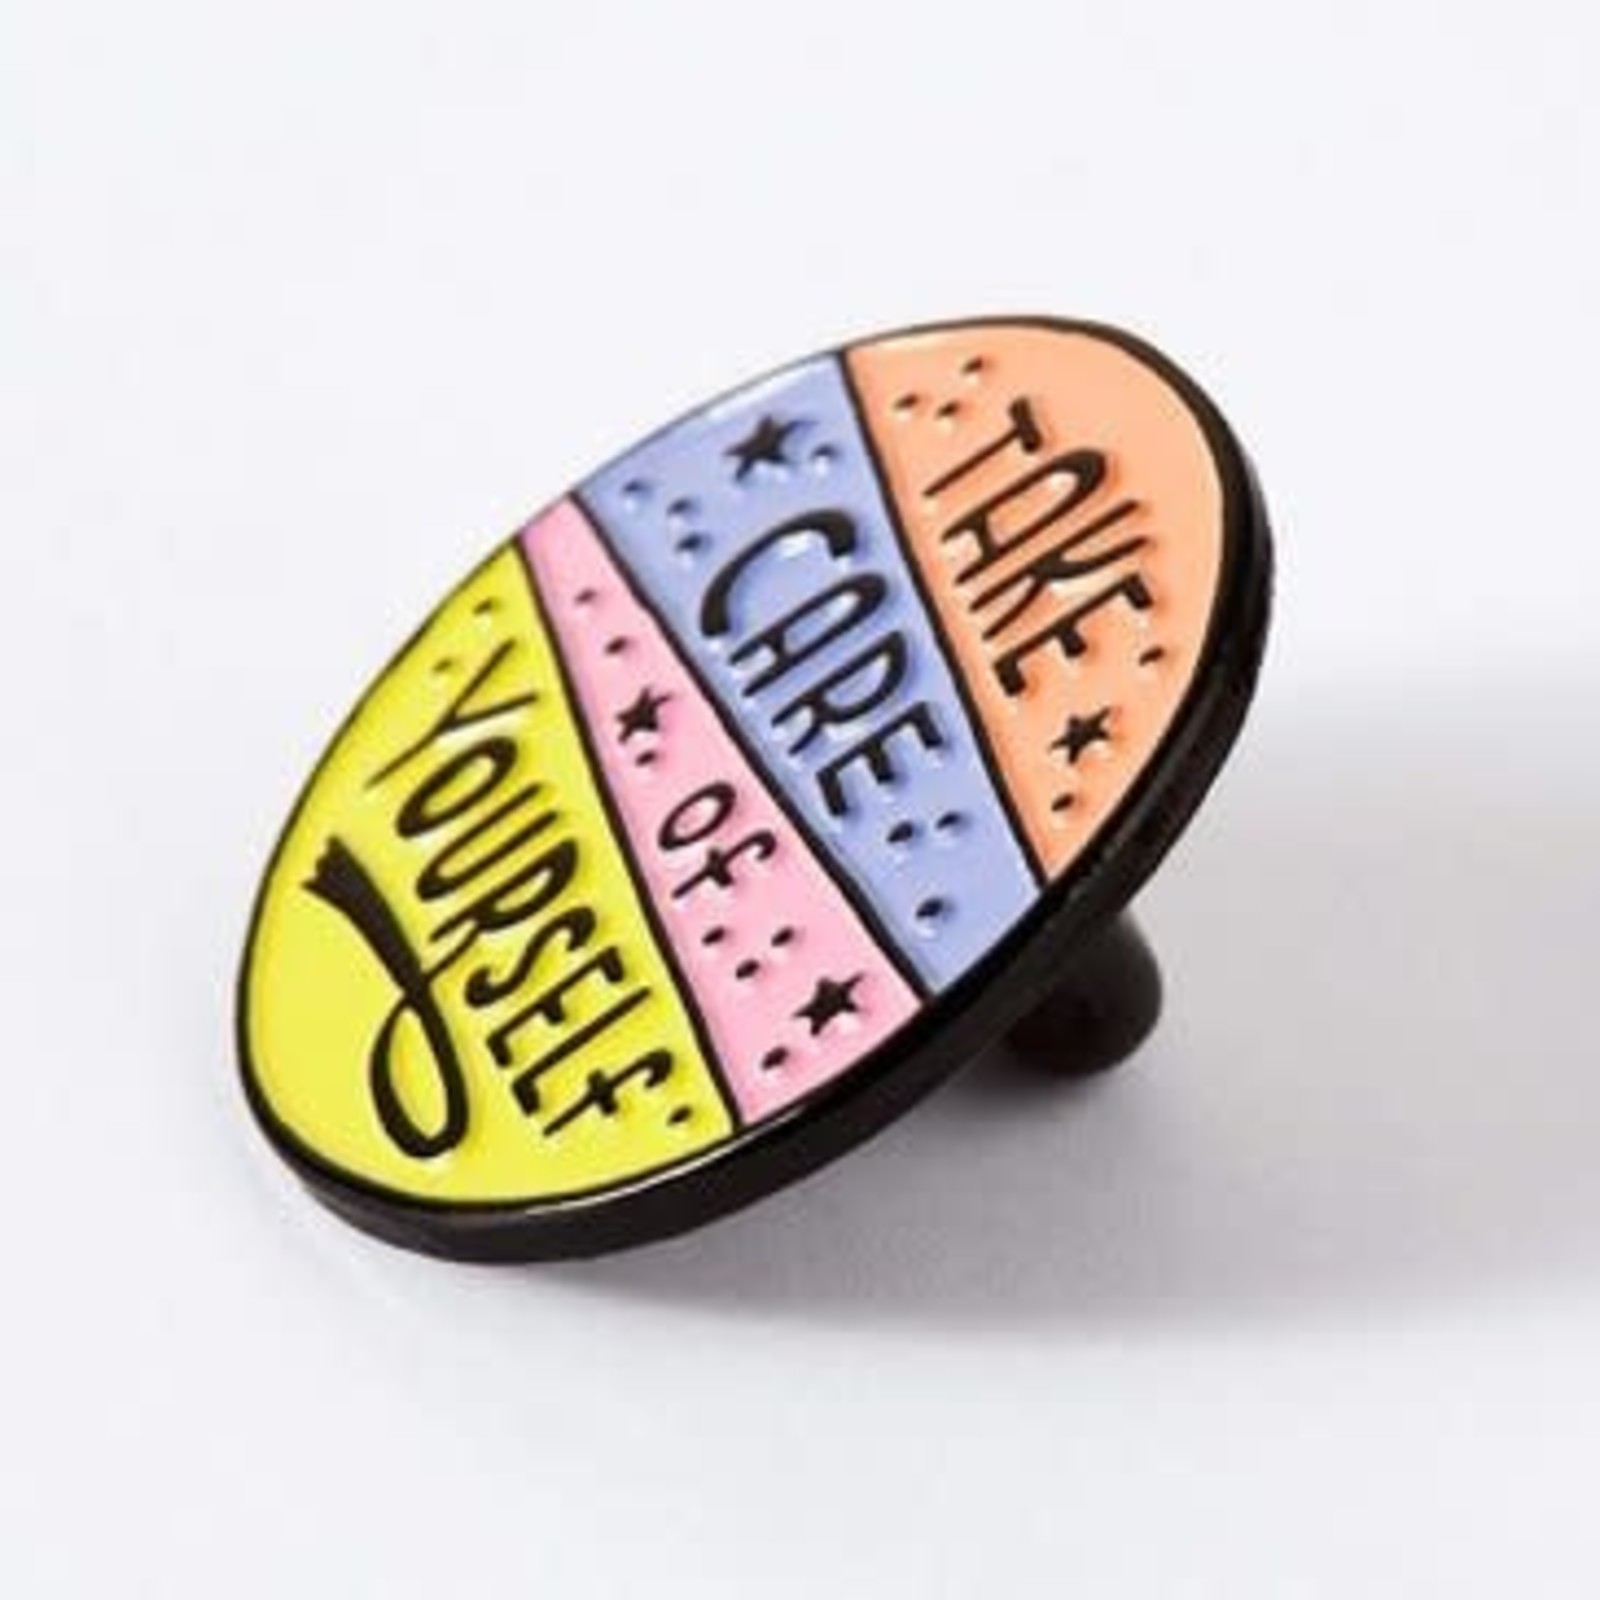 Punky Pins Take Care Of Yourself Soft Enamel Pin